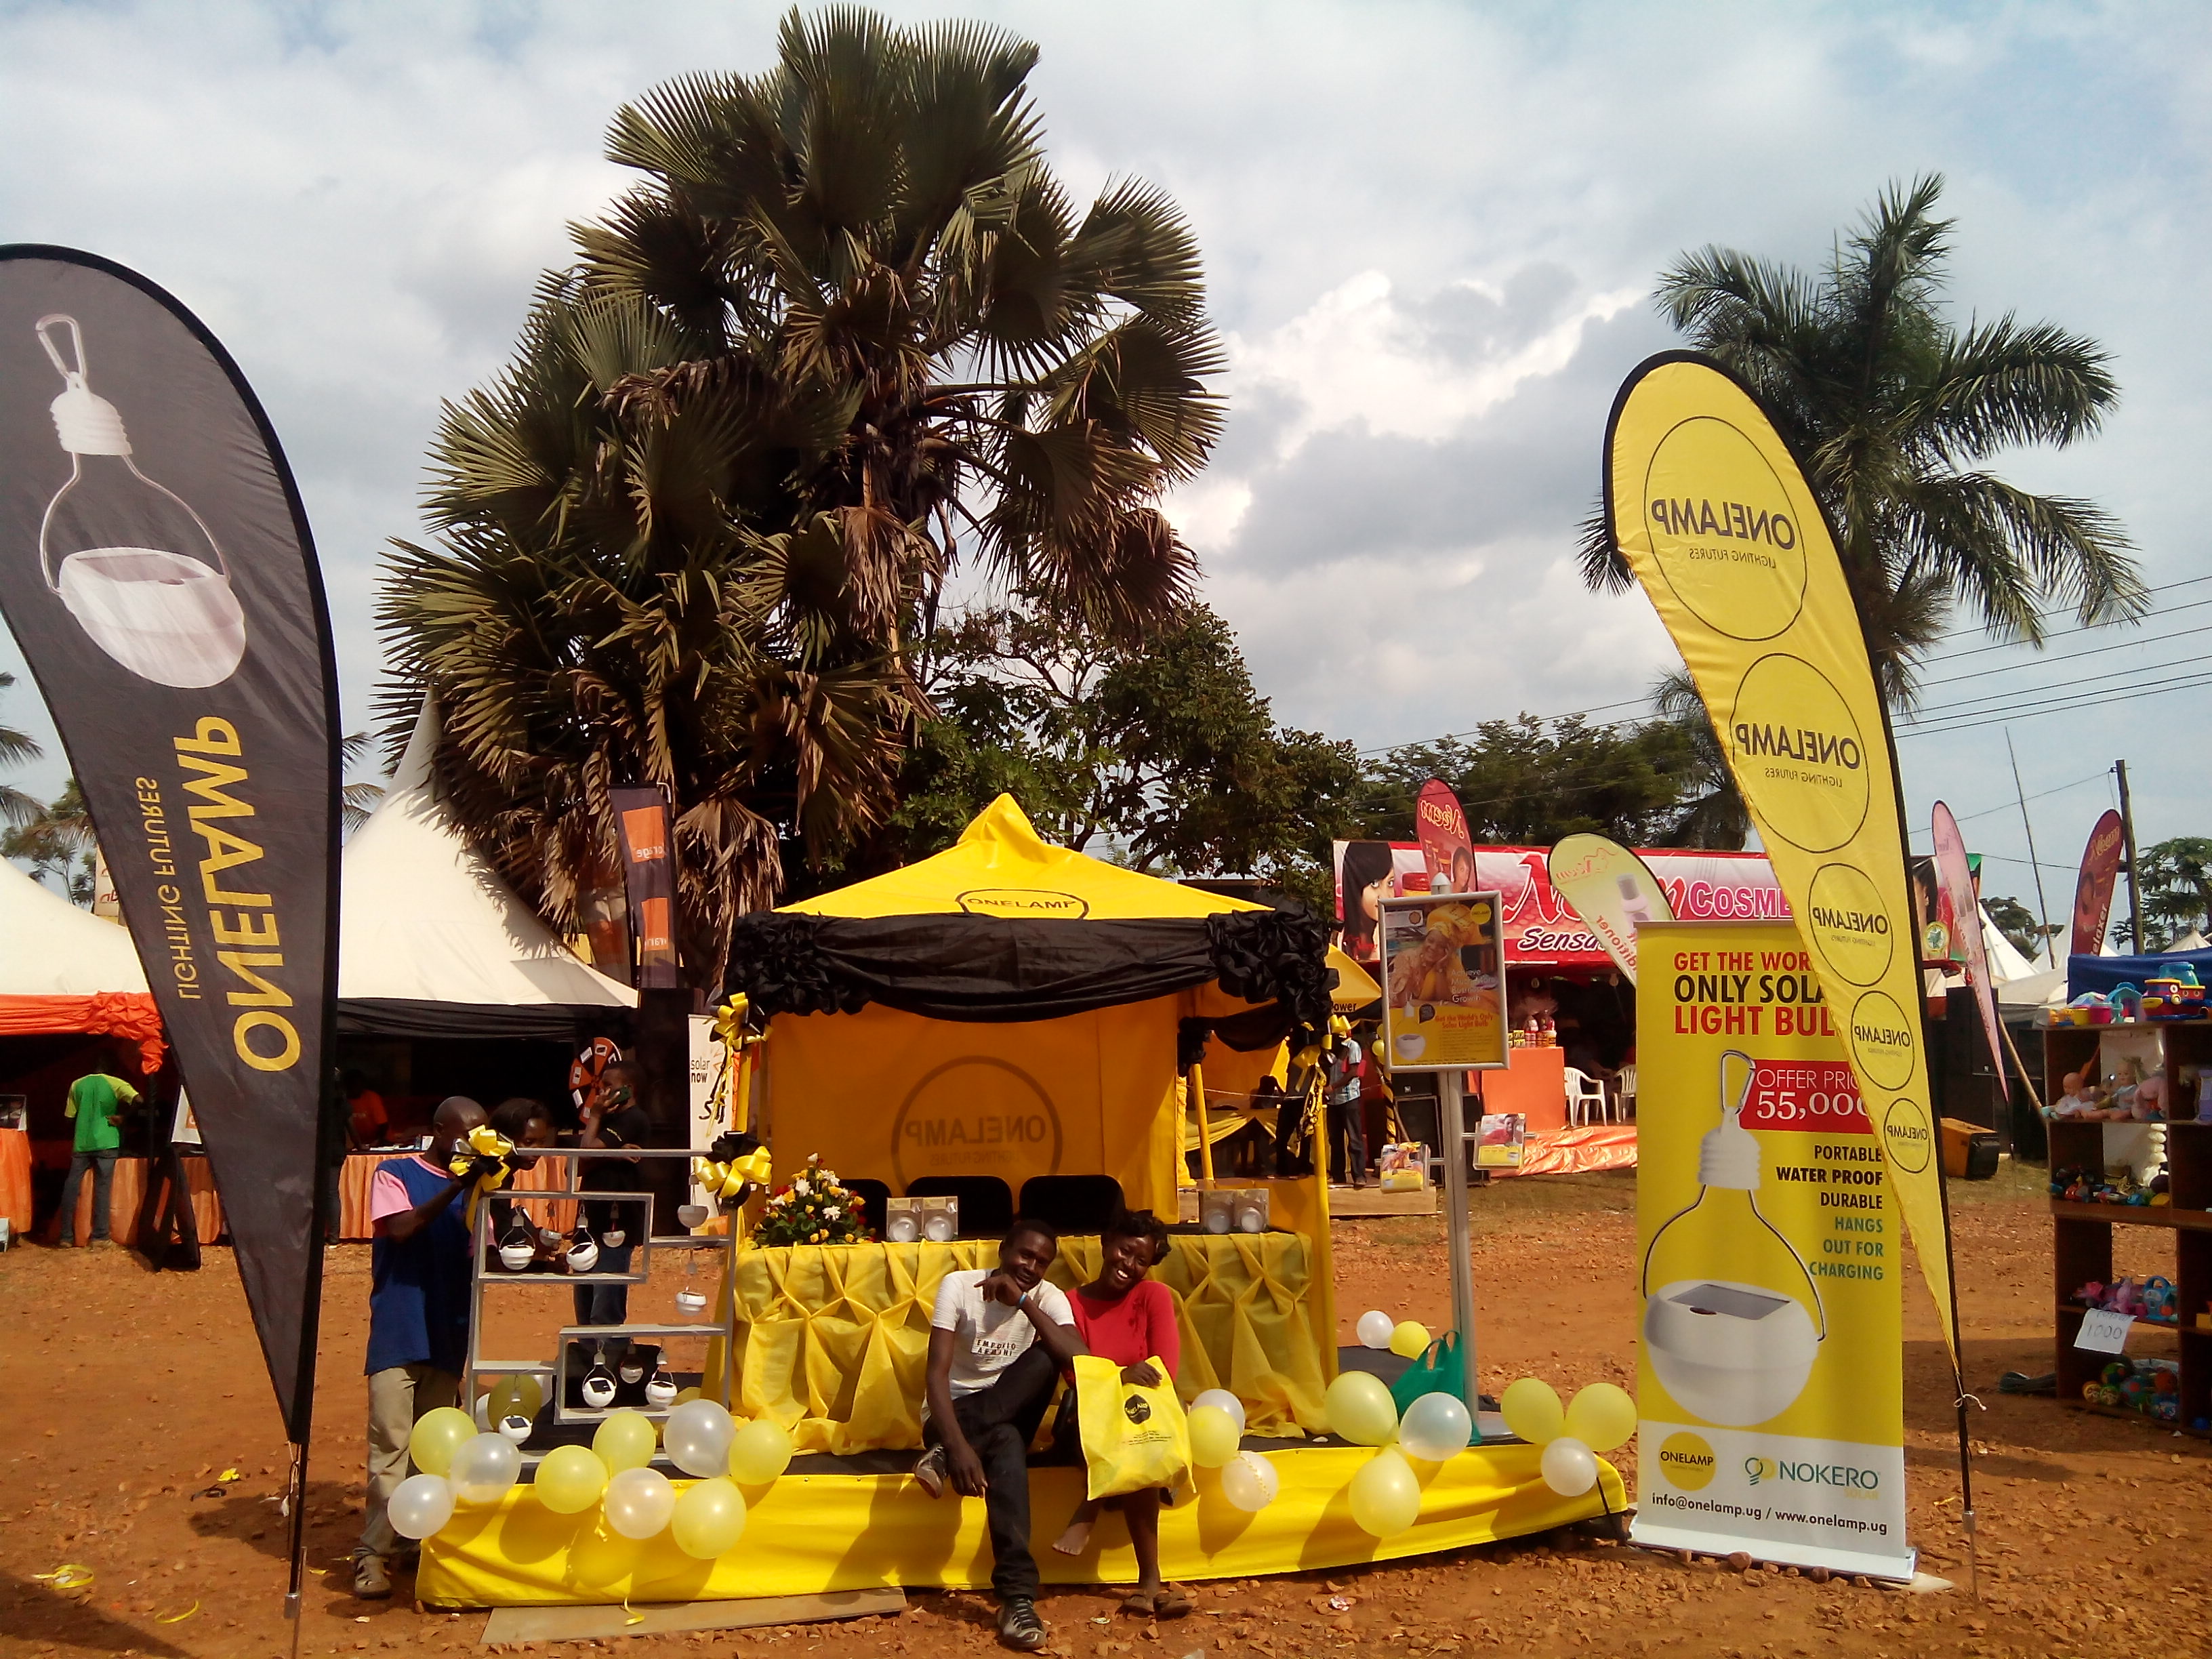 Jinja National Trade Show hosts Onelamp to showcase world's only solar light bulb